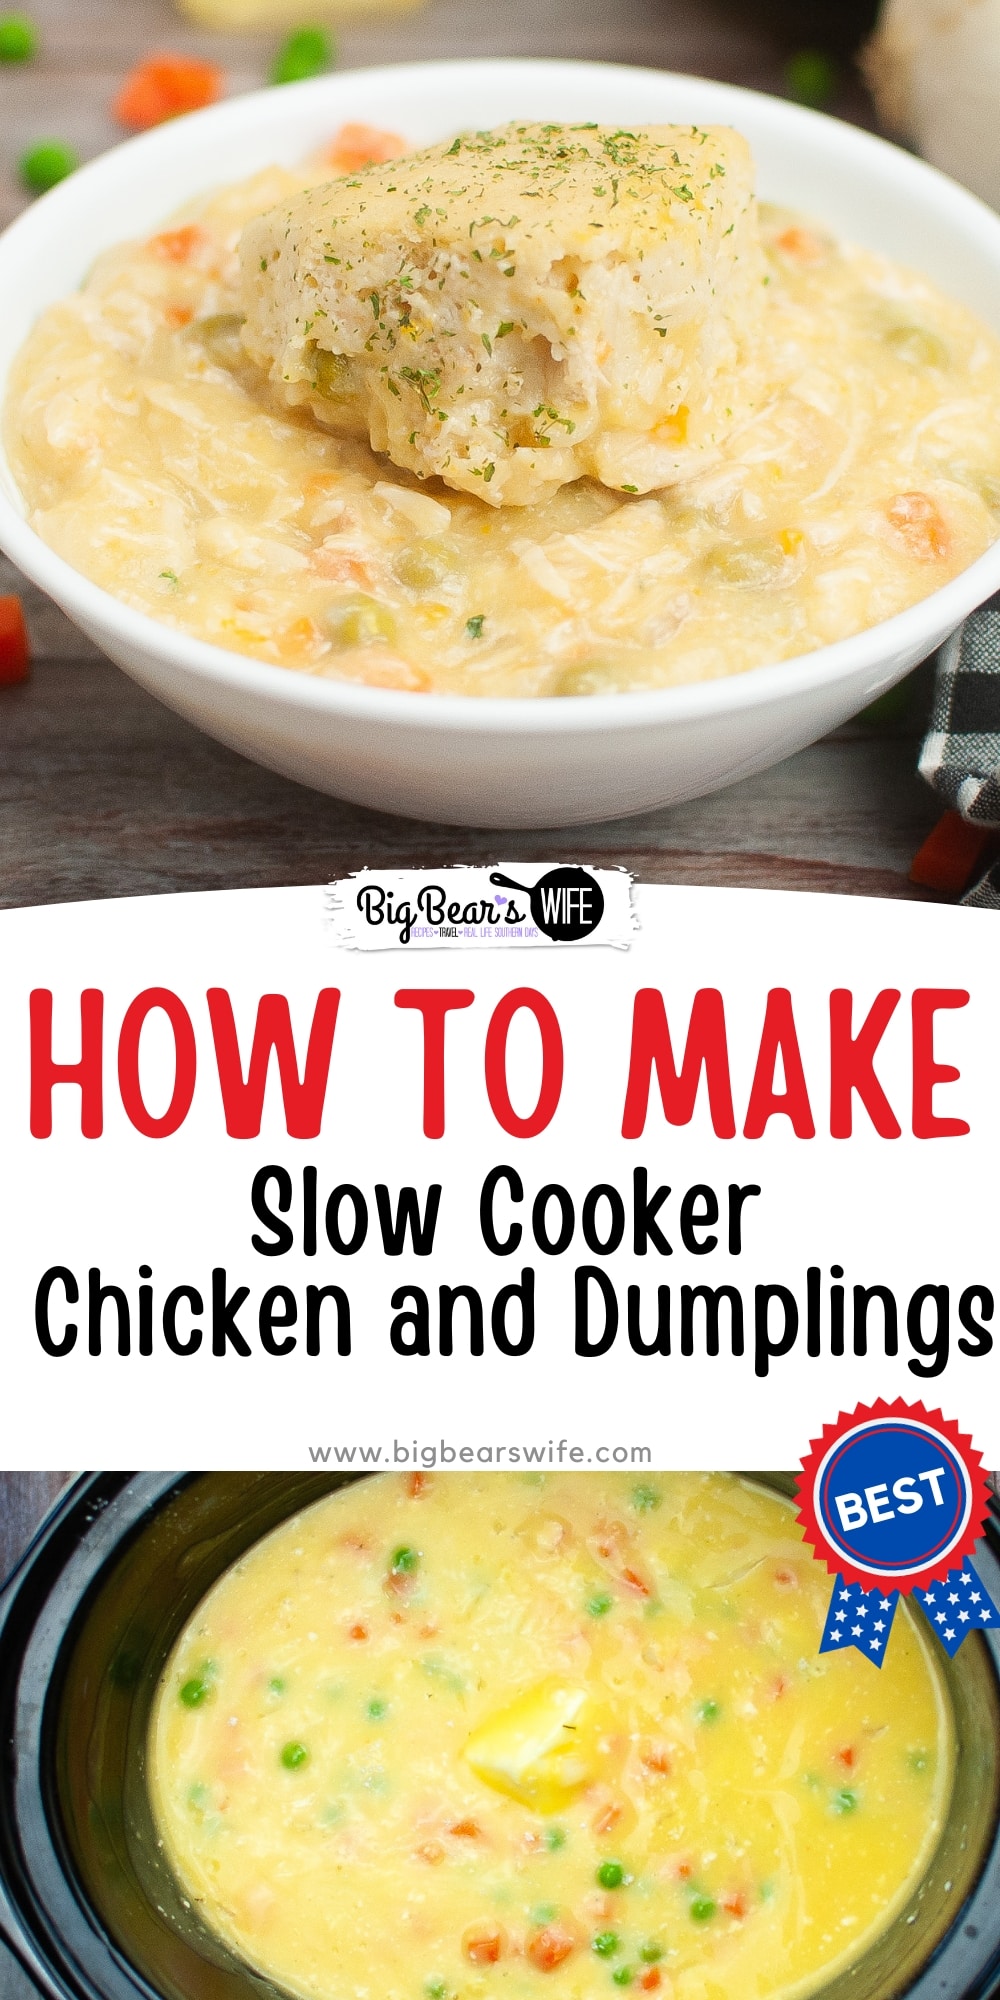 Busy weeknights? No problem! Explore the hassle-free method of preparing chicken and dumplings in just one pot using your trusty slow cooker. This time-saving recipe will revolutionize your weeknight dinners without compromising on taste or quality. You're going to love these Slow Cooker Chicken and Dumplings! via @bigbearswife